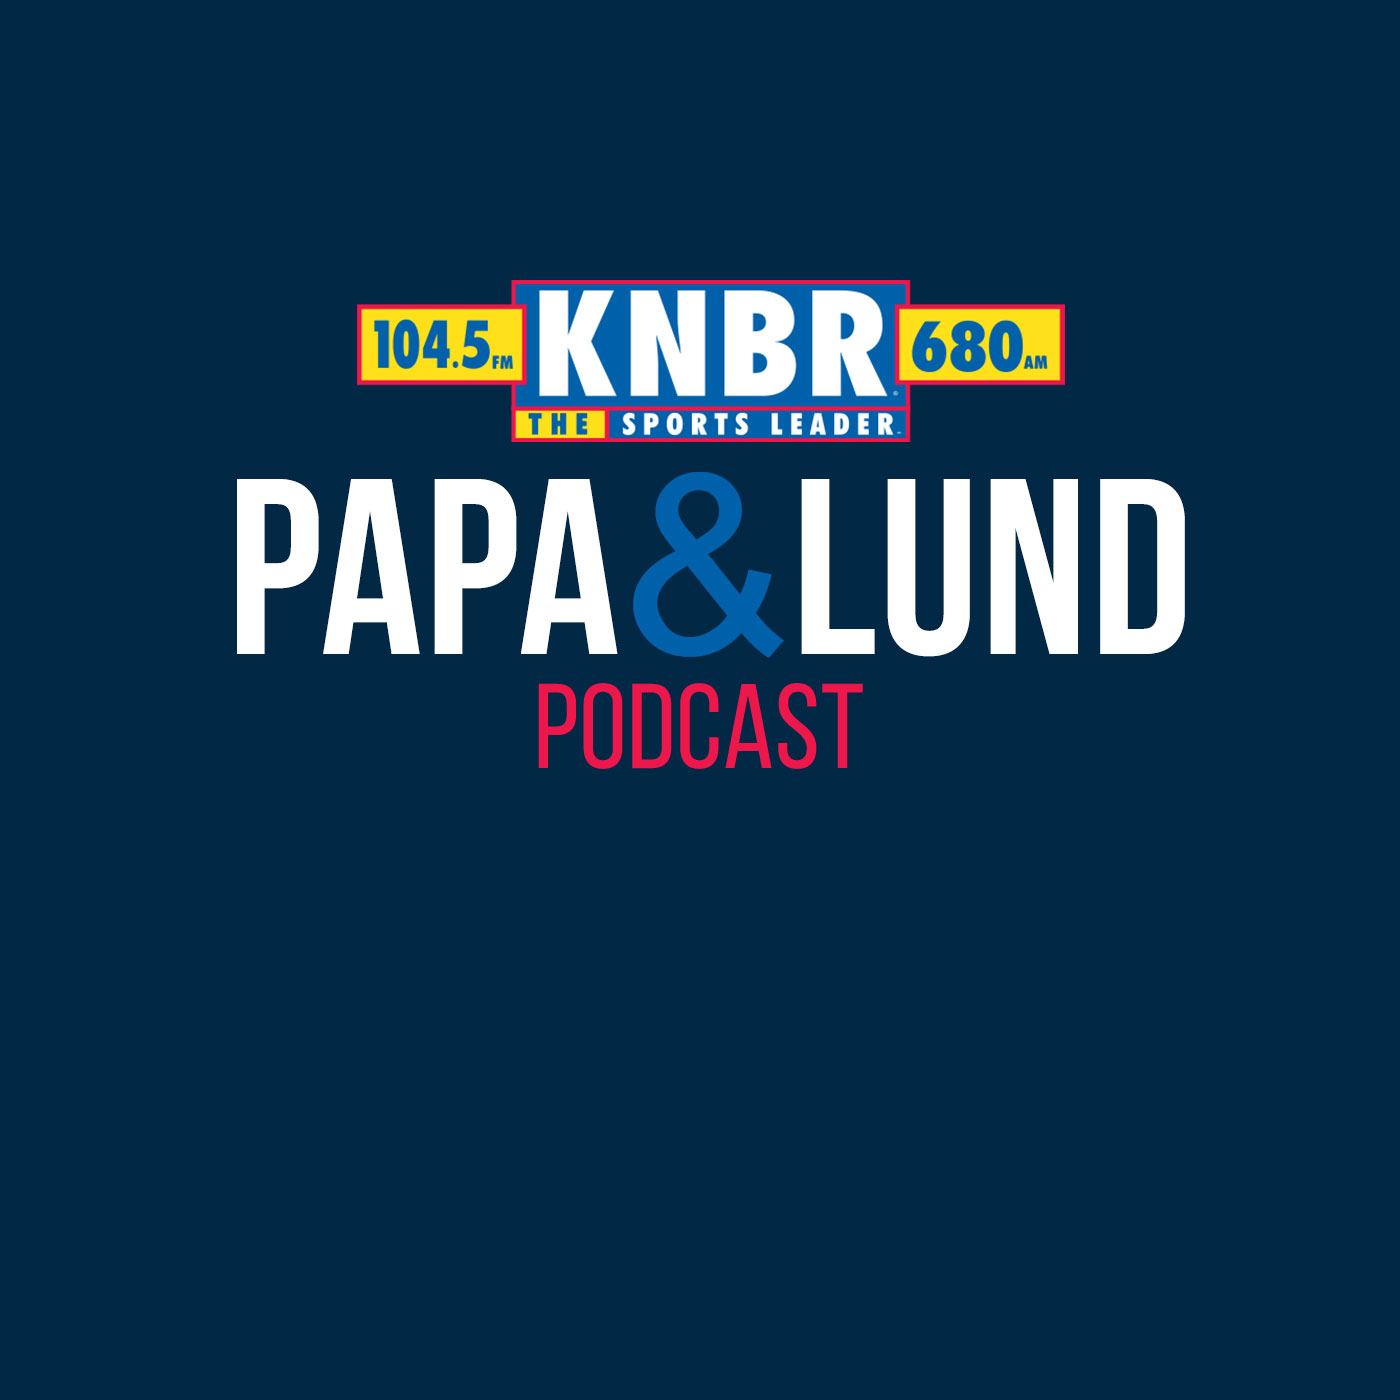 3-15 Janie McCauley joins Papa & Lund to discuss Klay Thompsons press conference over the weekend & a possible time-table for a return